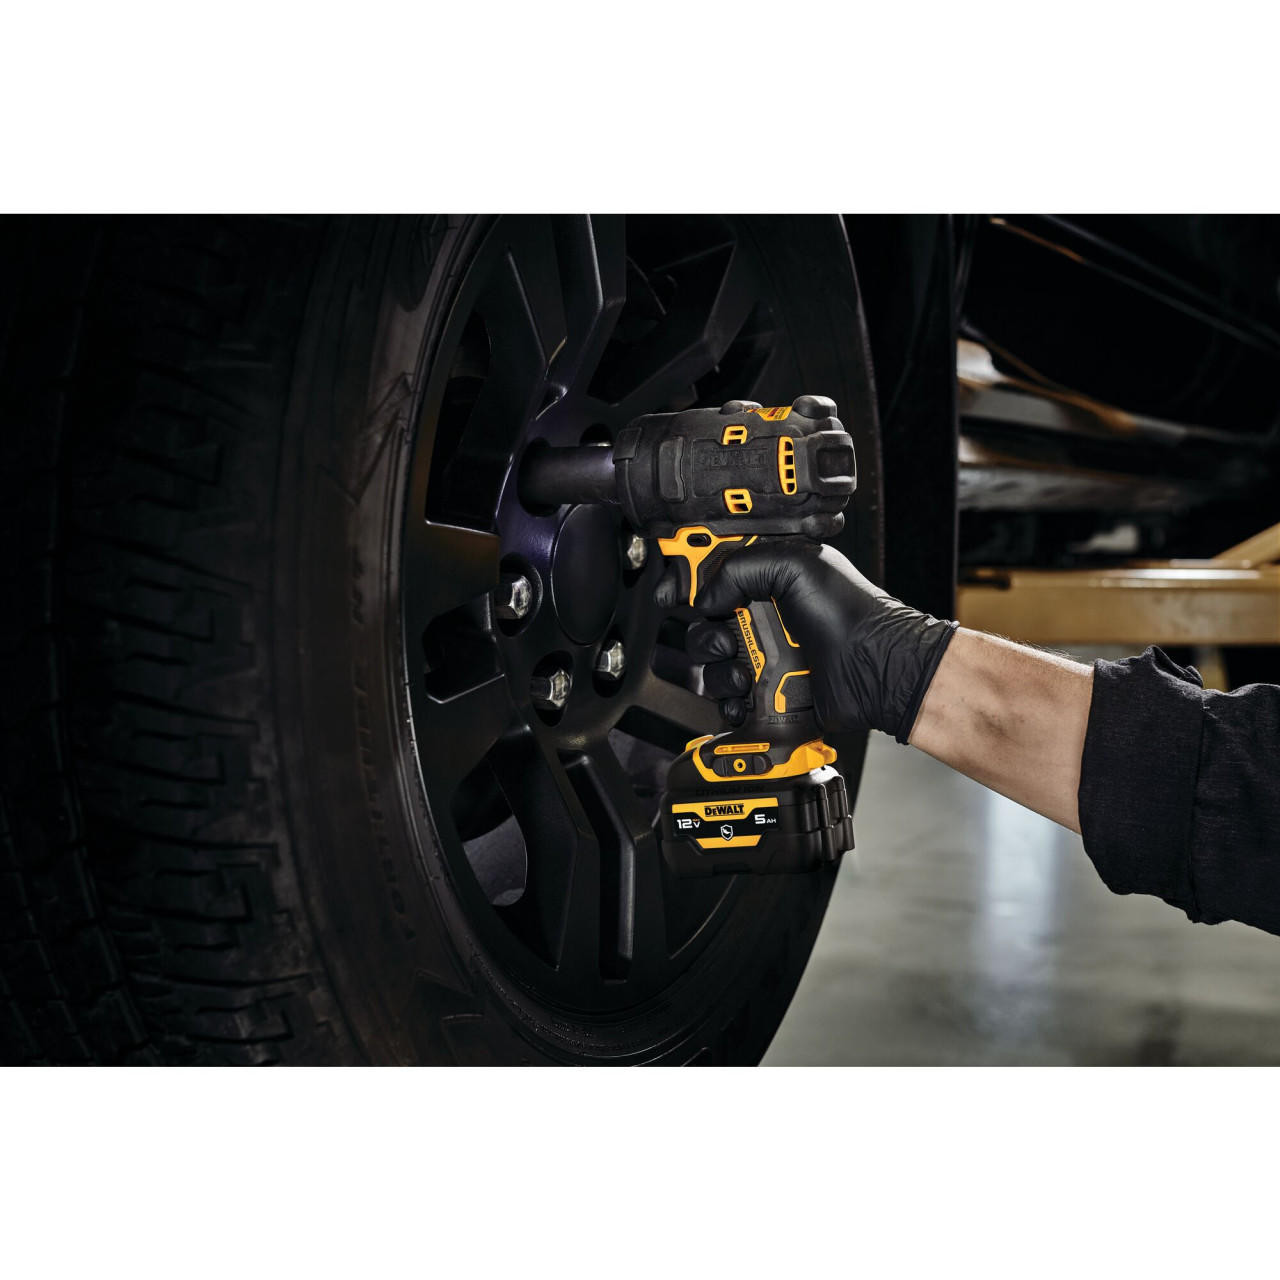 Dewalt DEWALT XTREME 12V MAX Brushless 1/2 in. Cordless Impact Wrench(Tool Only) DCF901B 